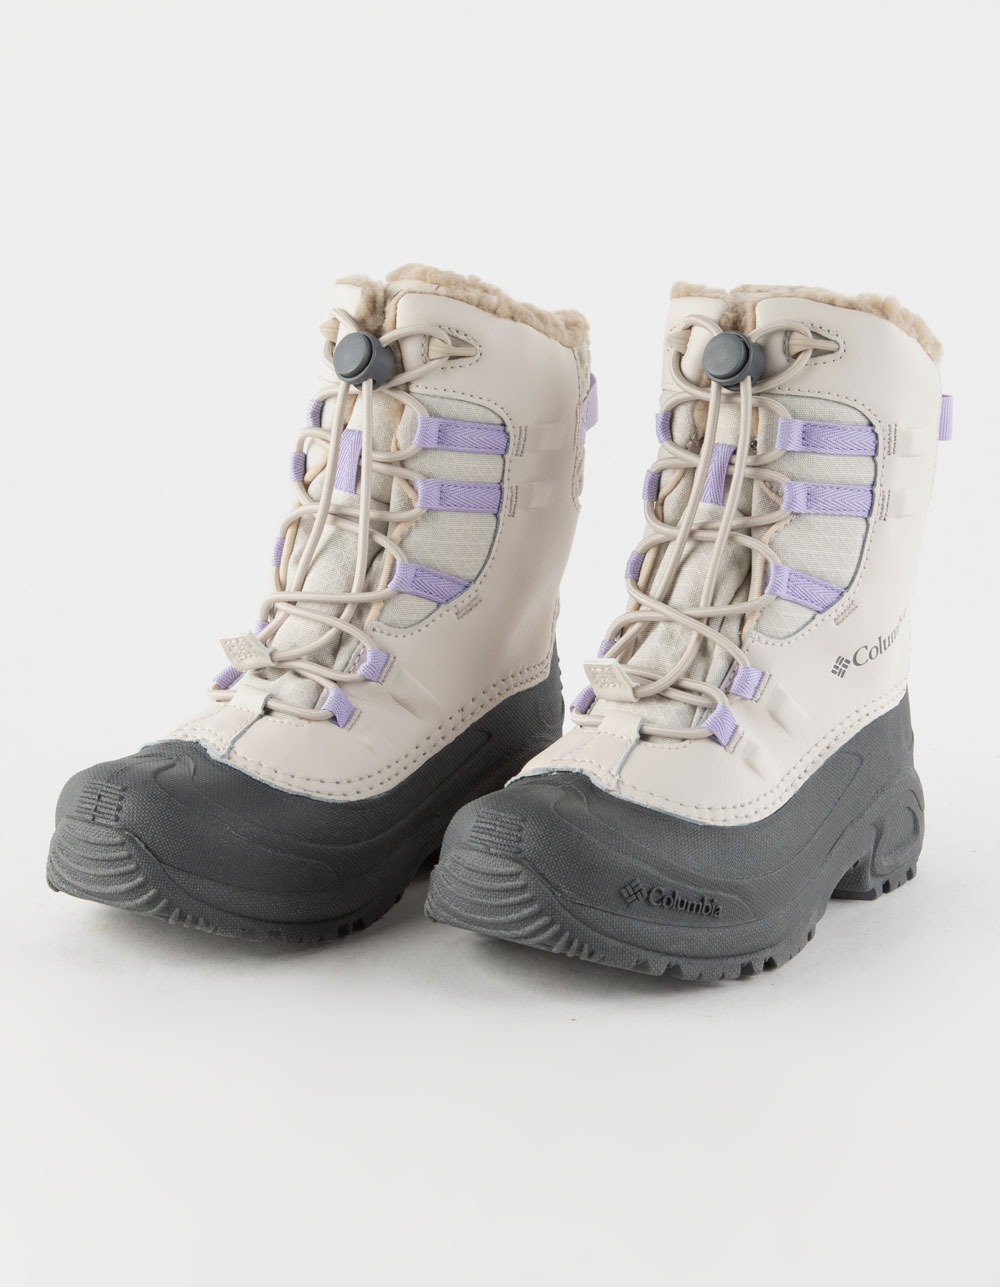 COLUMBIA Bugaboot Celsius Girls Boots - IVORY | Tillys